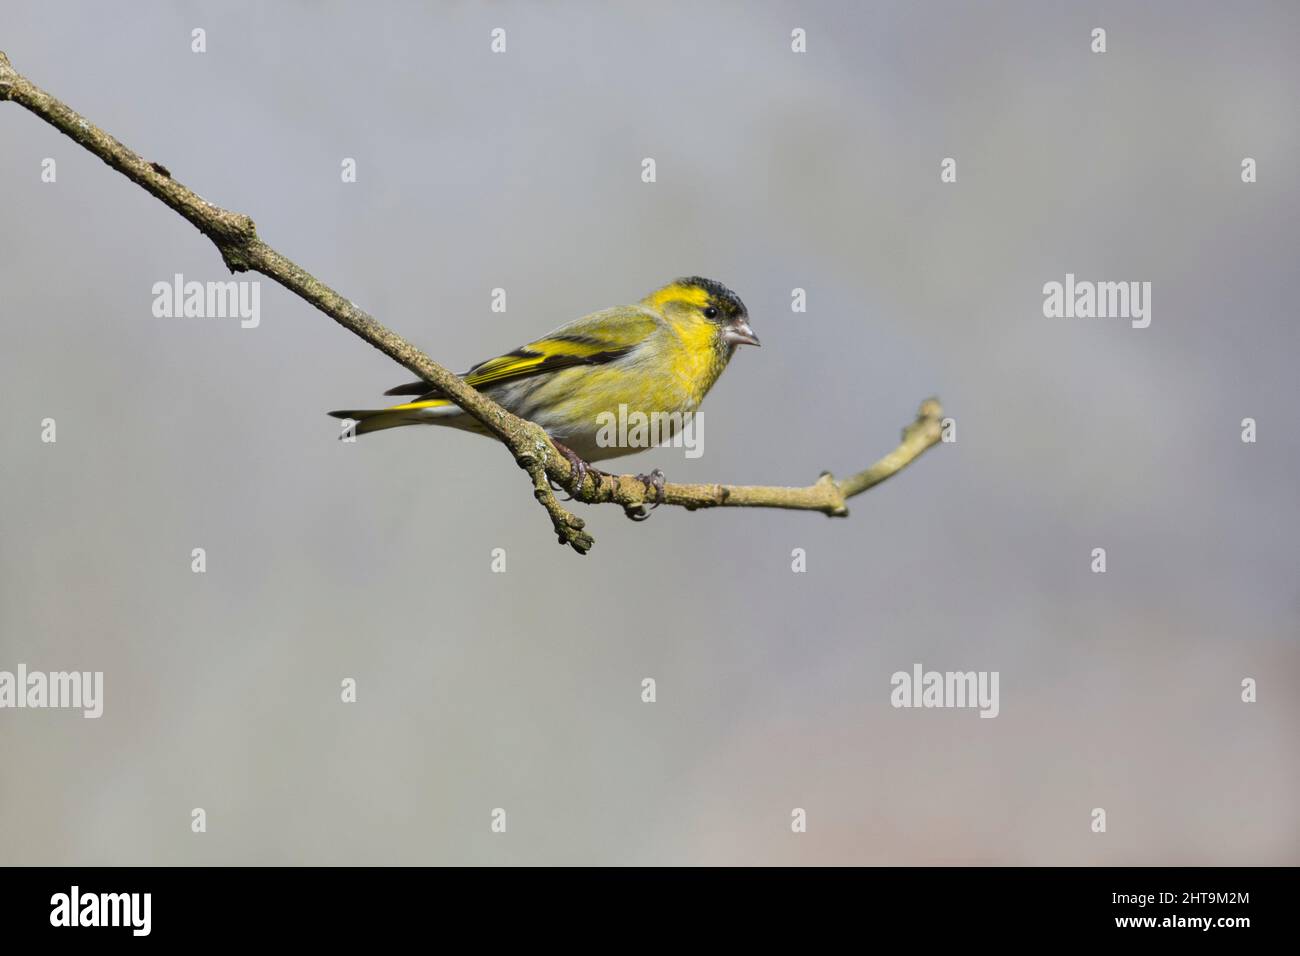 Male Eurasian siskin (Carduelis spinus) perched on a twig Stock Photo